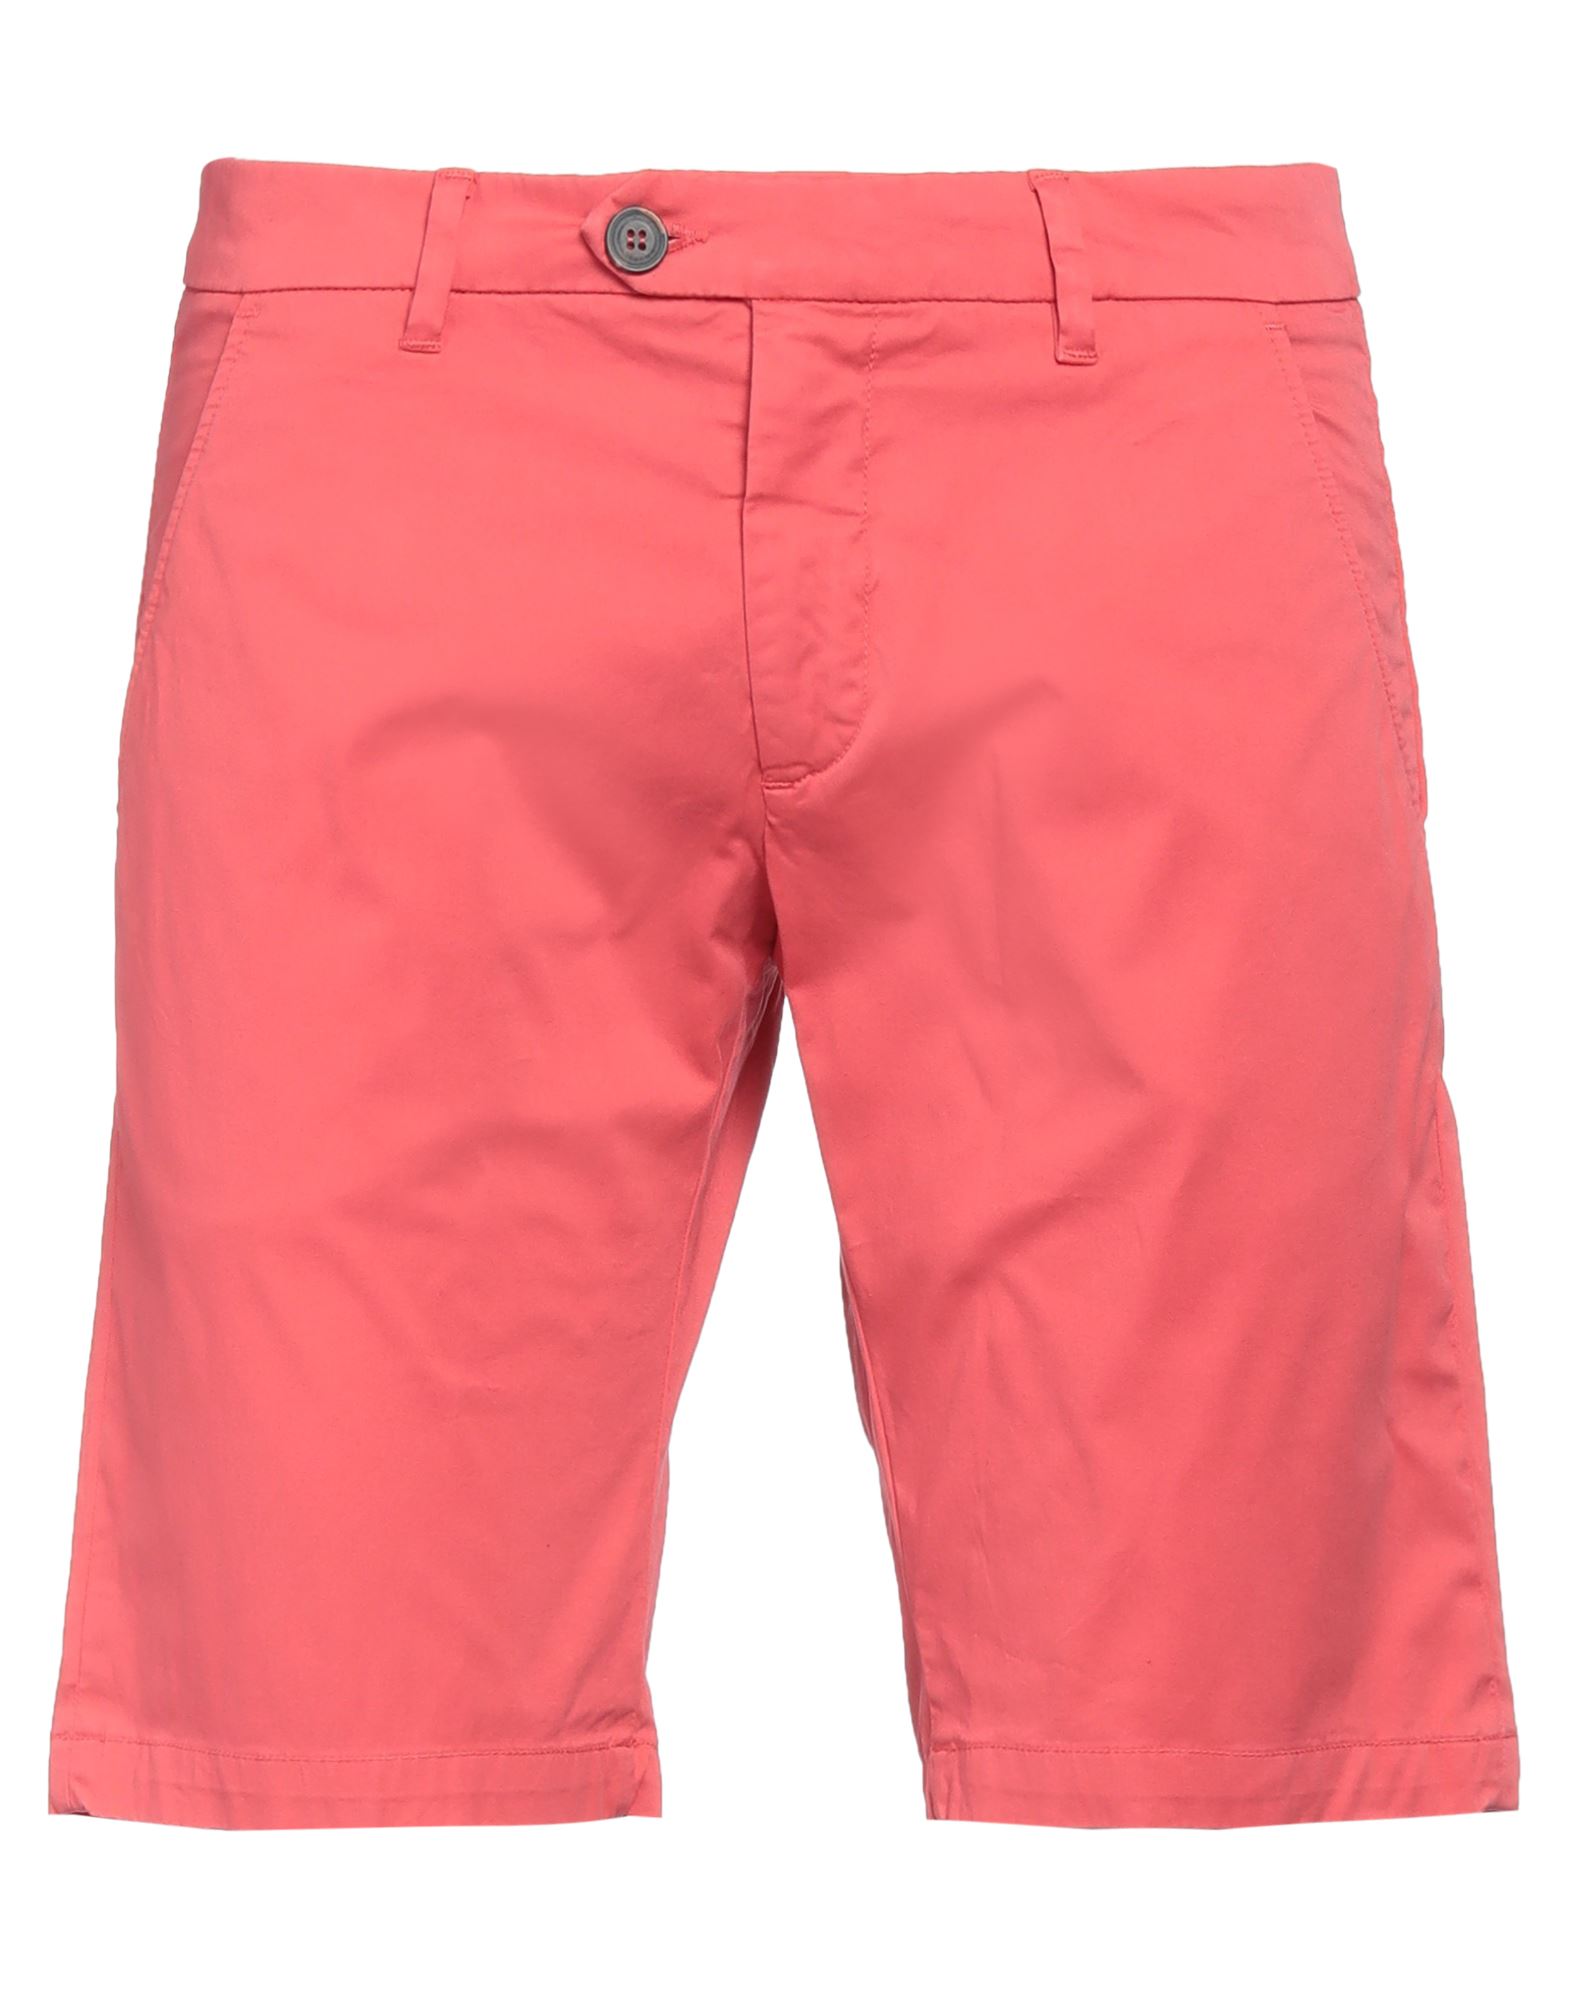 Roy Rogers Roÿ Roger's Man Shorts & Bermuda Shorts Coral Size 34 Cotton, Elastane In Red